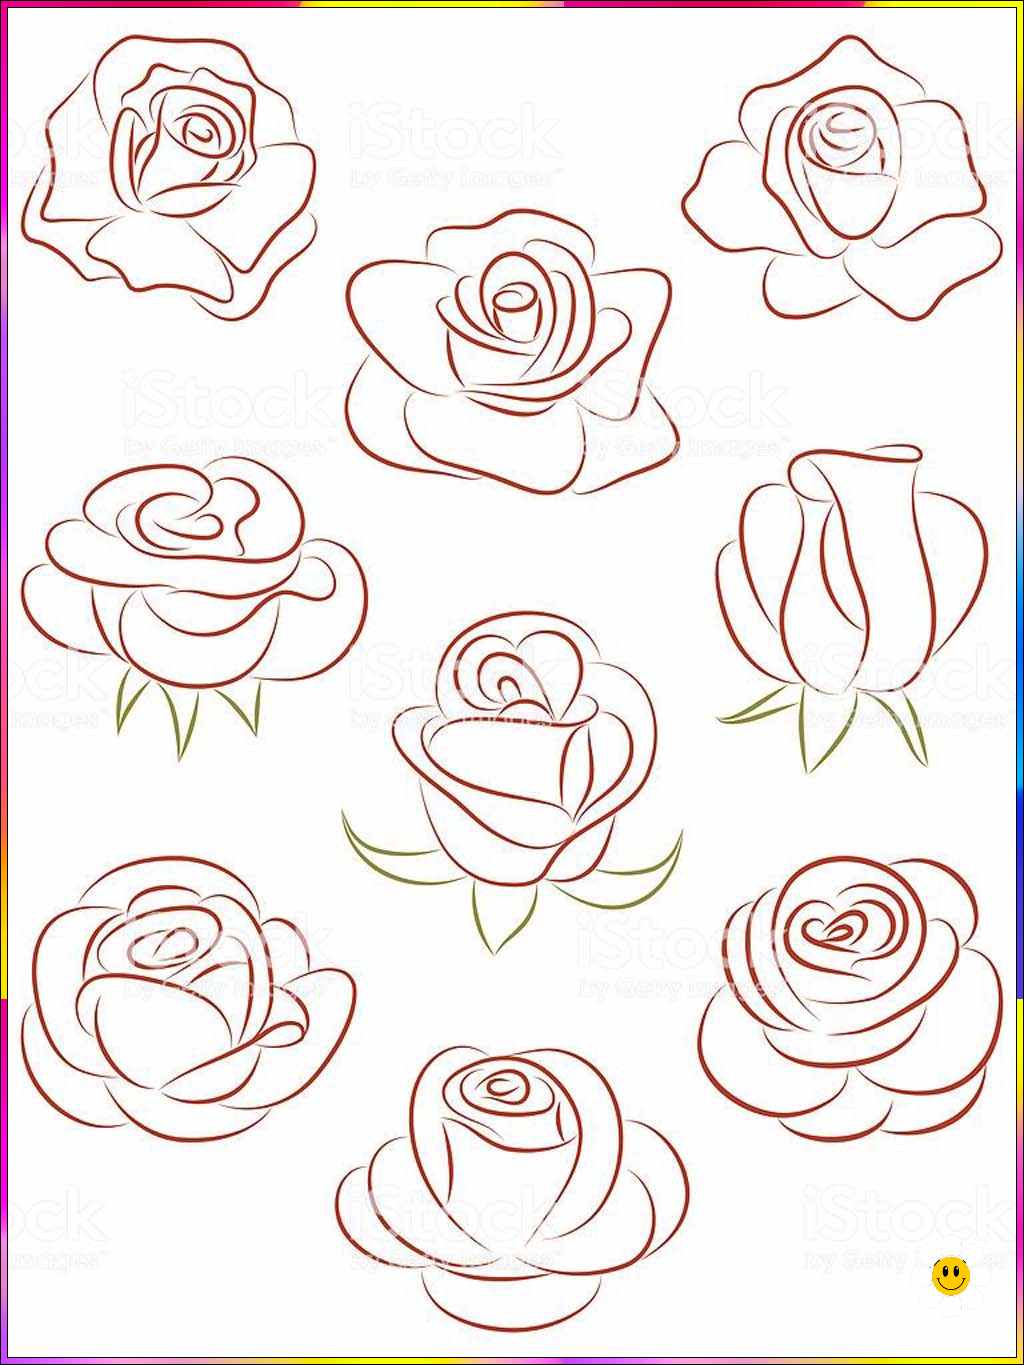 flower drawing step by step
